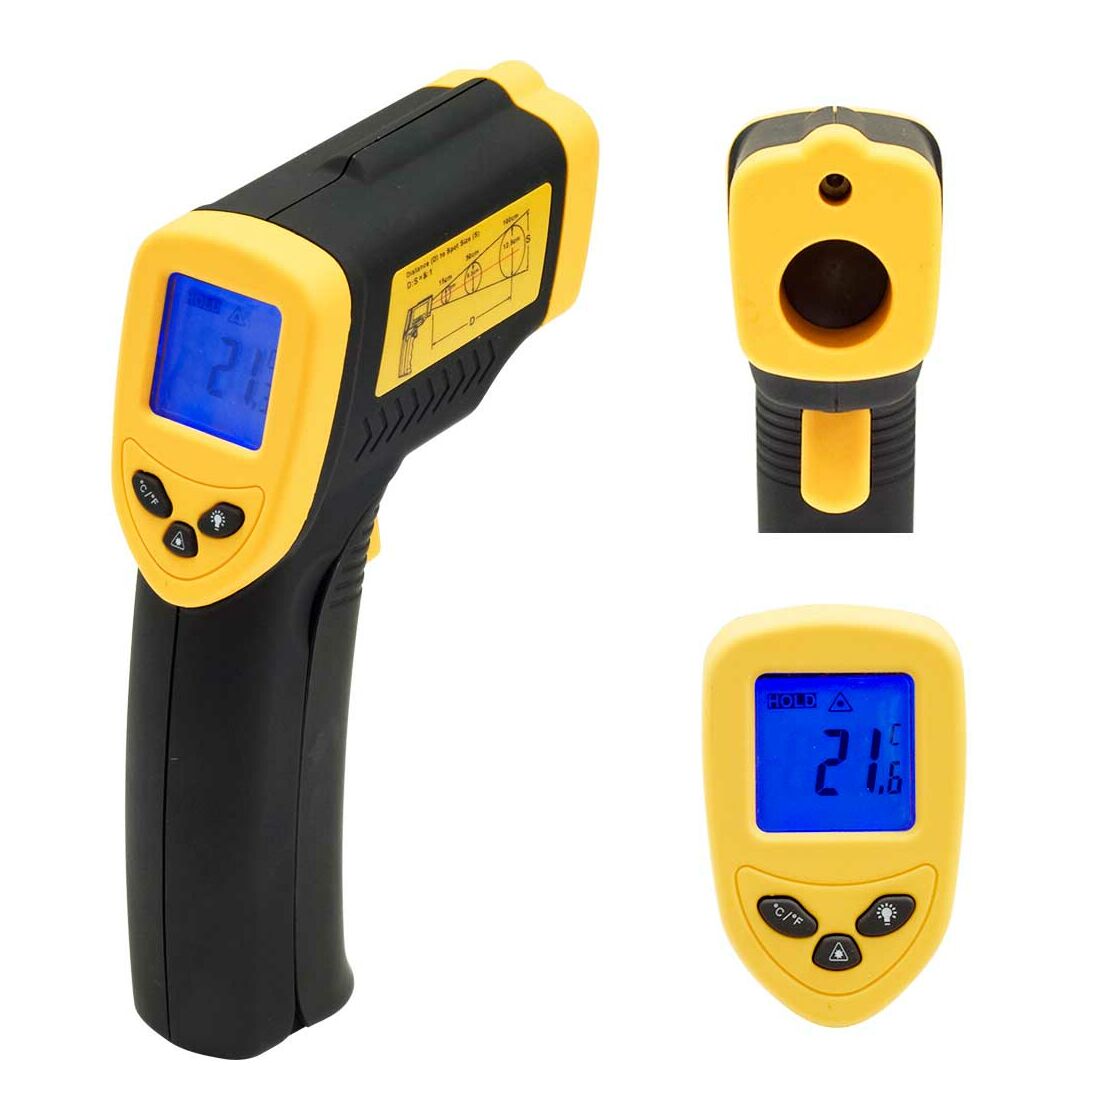 Thermometer with laser pointer, temperature range -50 ° C to 380 ° C, 92,32  €